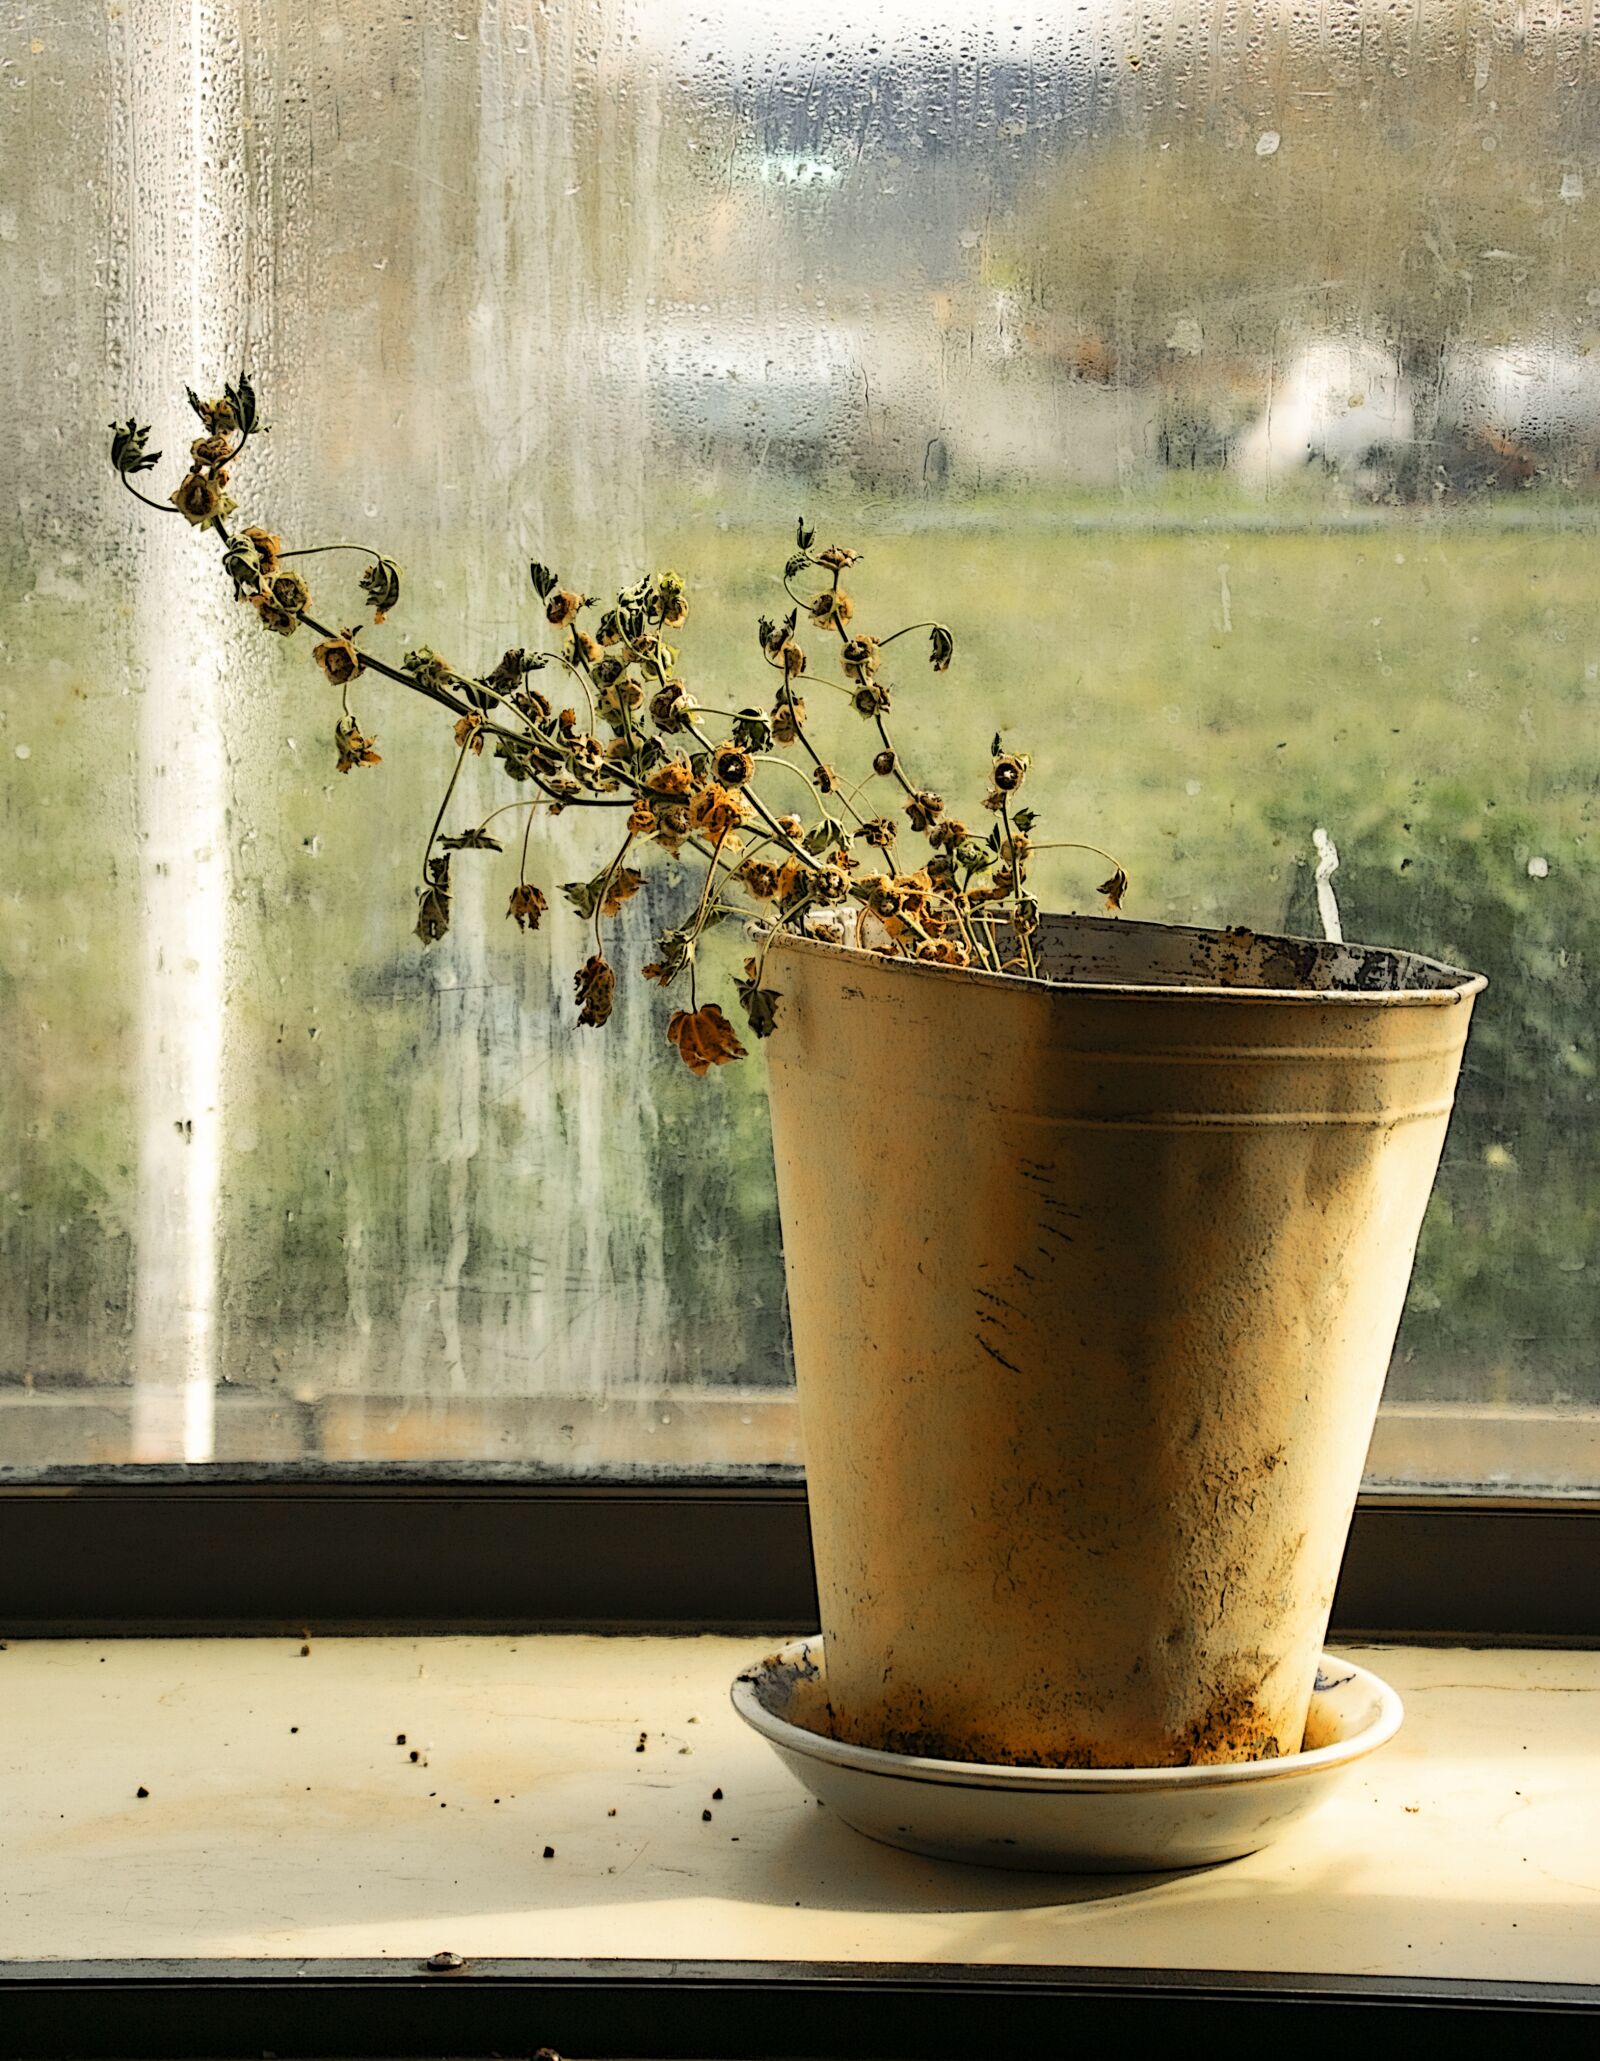 Nikon 1 Nikkor VR 10-30mm F3.5-5.6 PD-Zoom sample photo. Kitchen window, flowers, dying photography